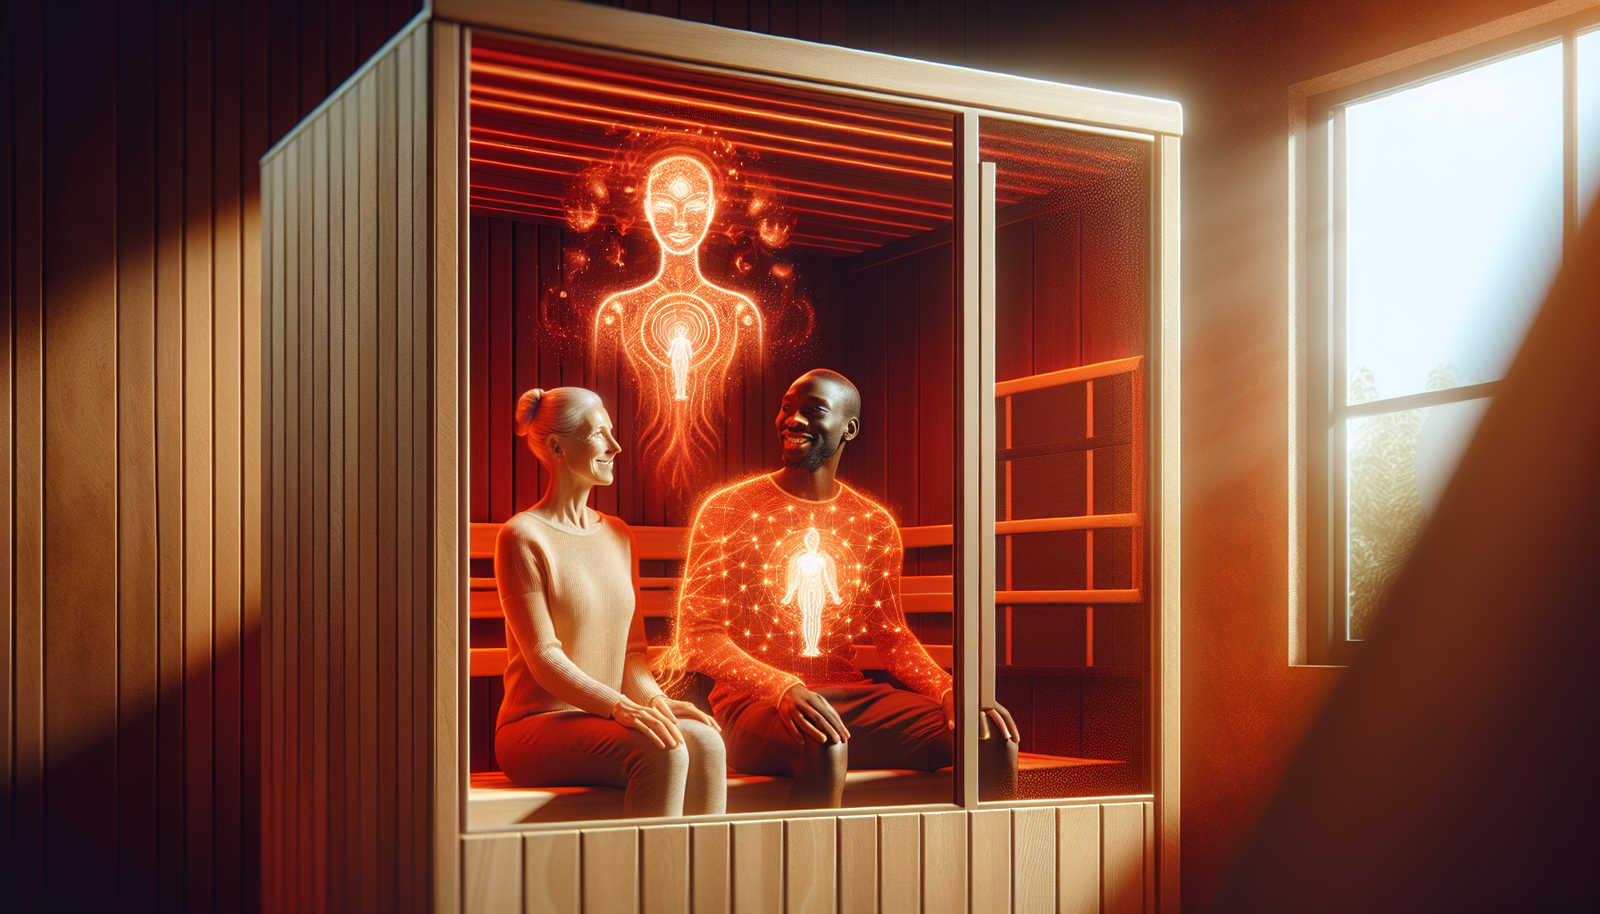 Is It Safe To Use An Infrared Sauna With Medical Conditions?